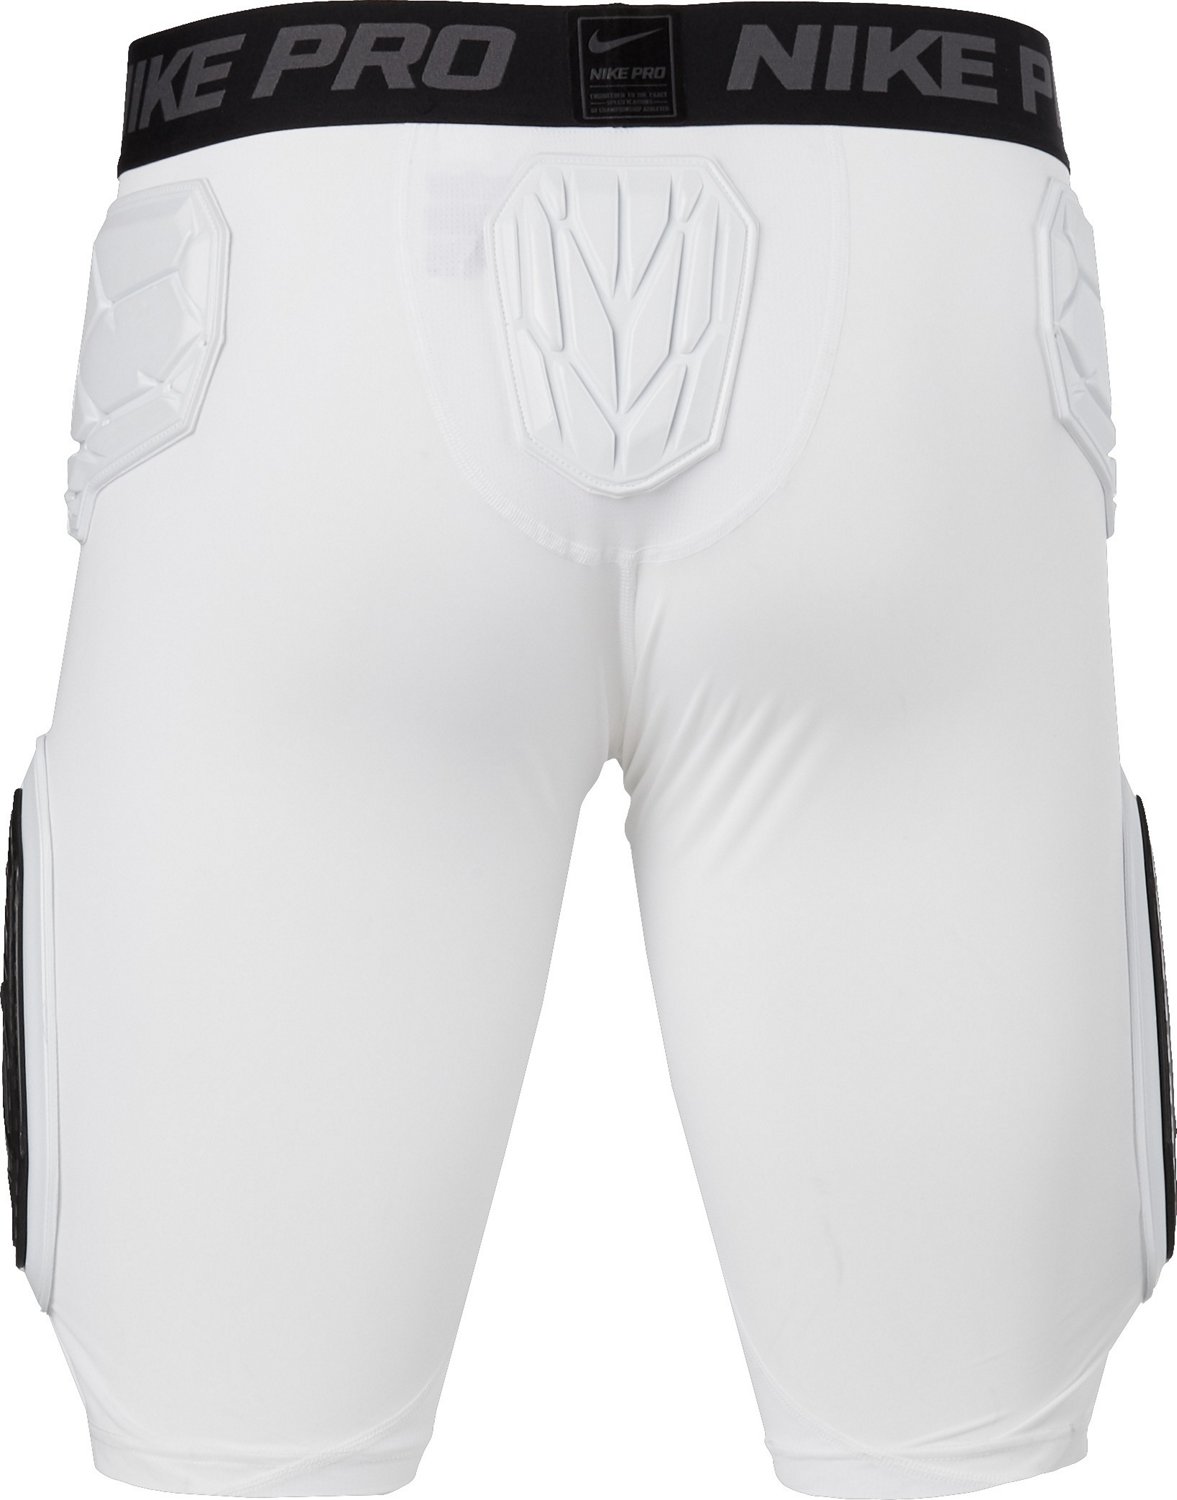 Nike Men's Pro Combat Compression Hyperstrong Whitegray Football Girdle  Shorts with Knee Pads Size: Large New!